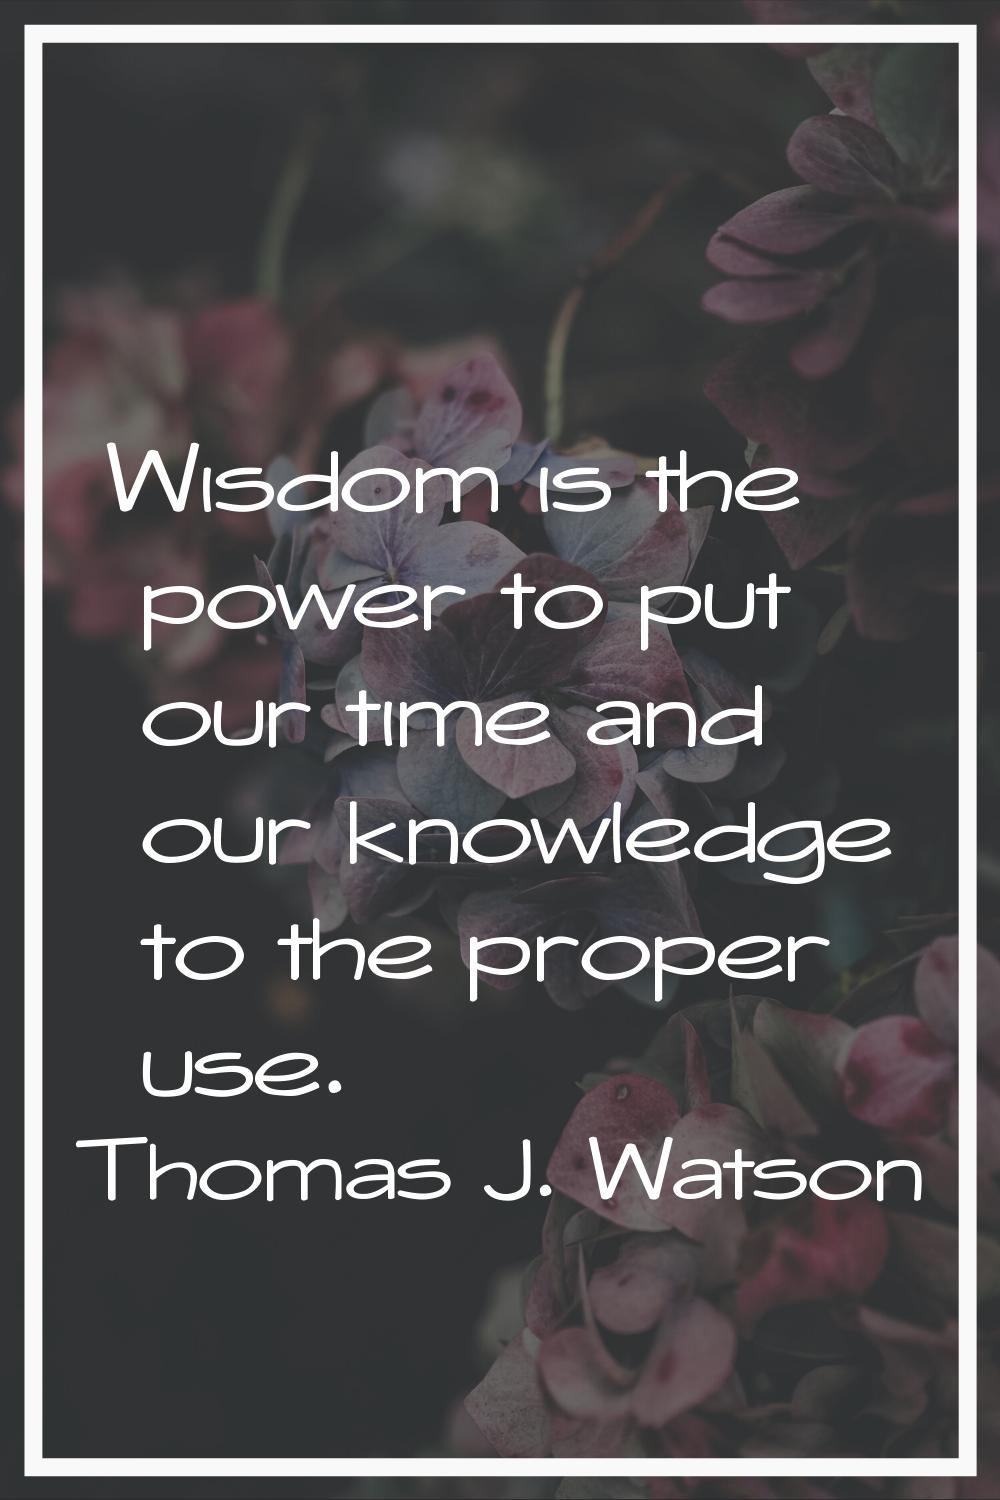 Wisdom is the power to put our time and our knowledge to the proper use.